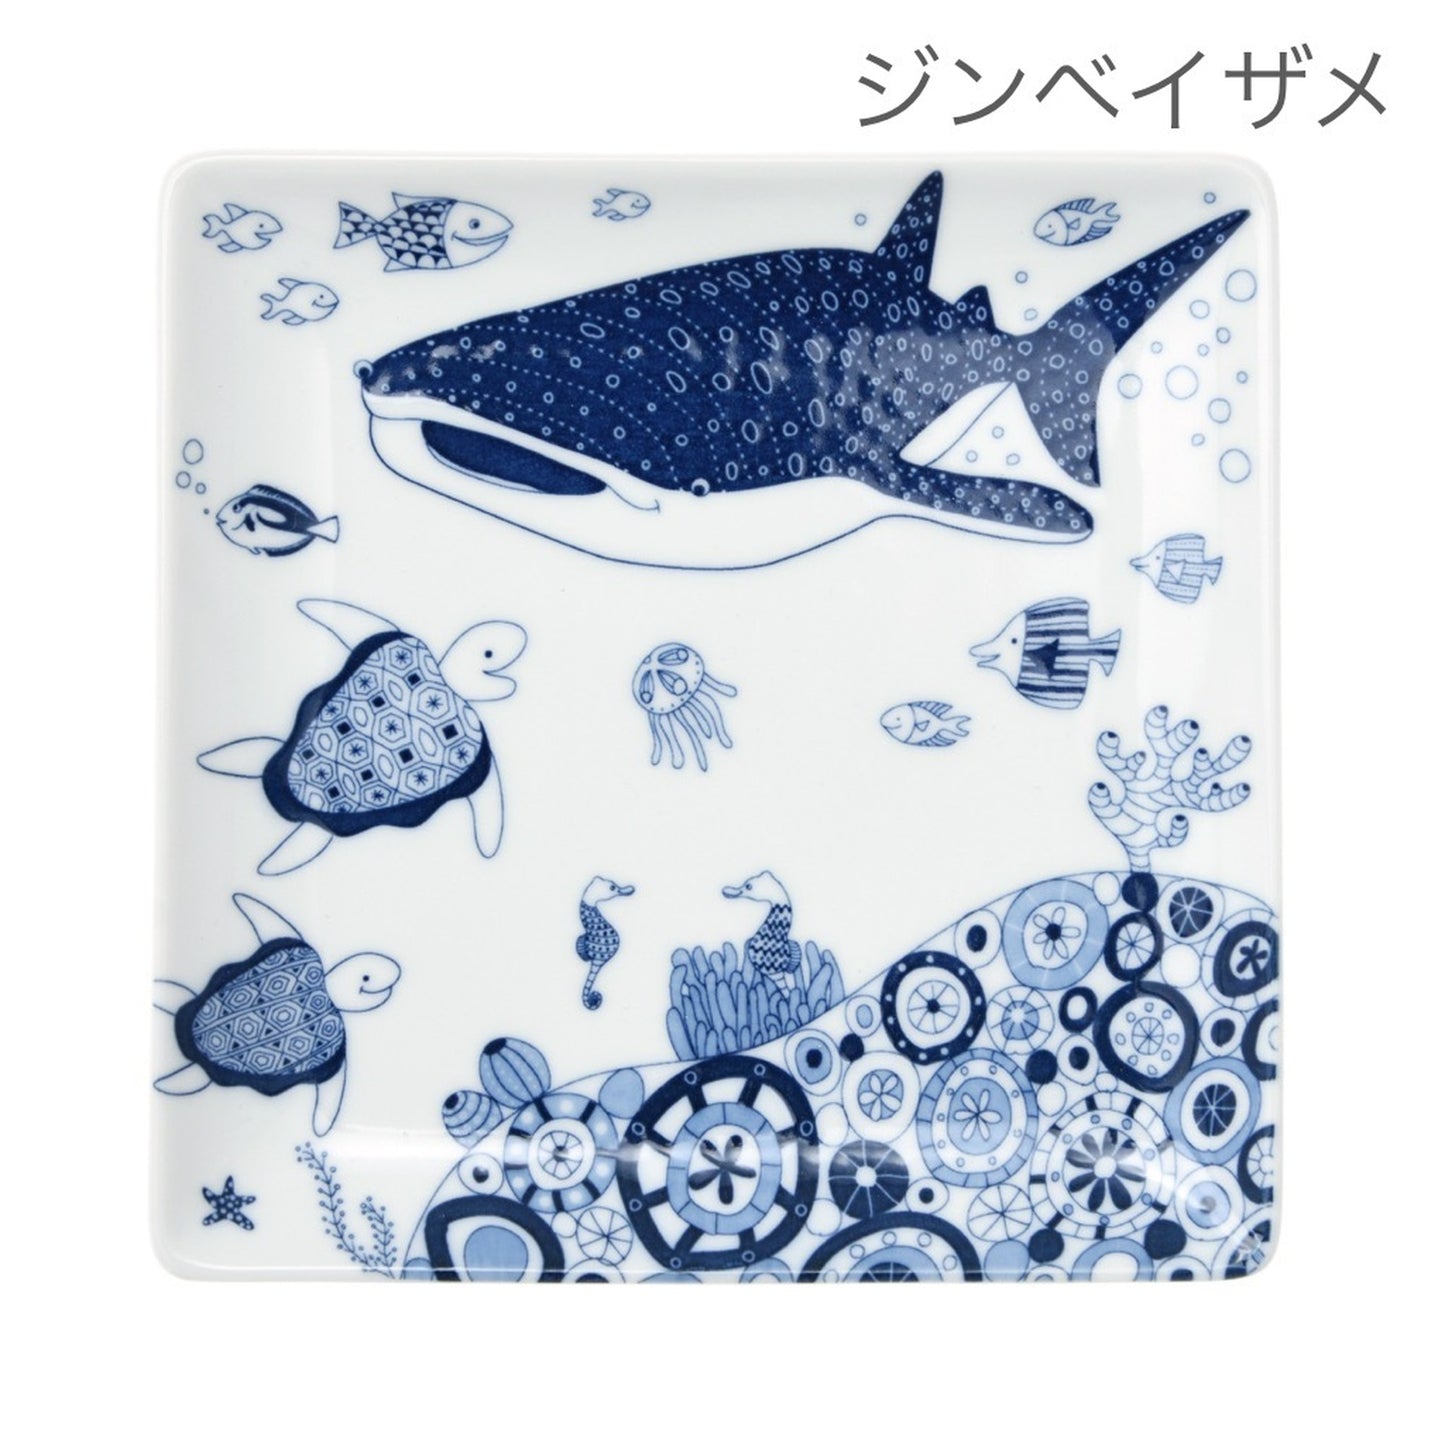 [natural69] [cocomarine] [conformal plate] [approximately 17 cm] Hasami ware tableware Nordic square plate square whale shark fish pattern manta